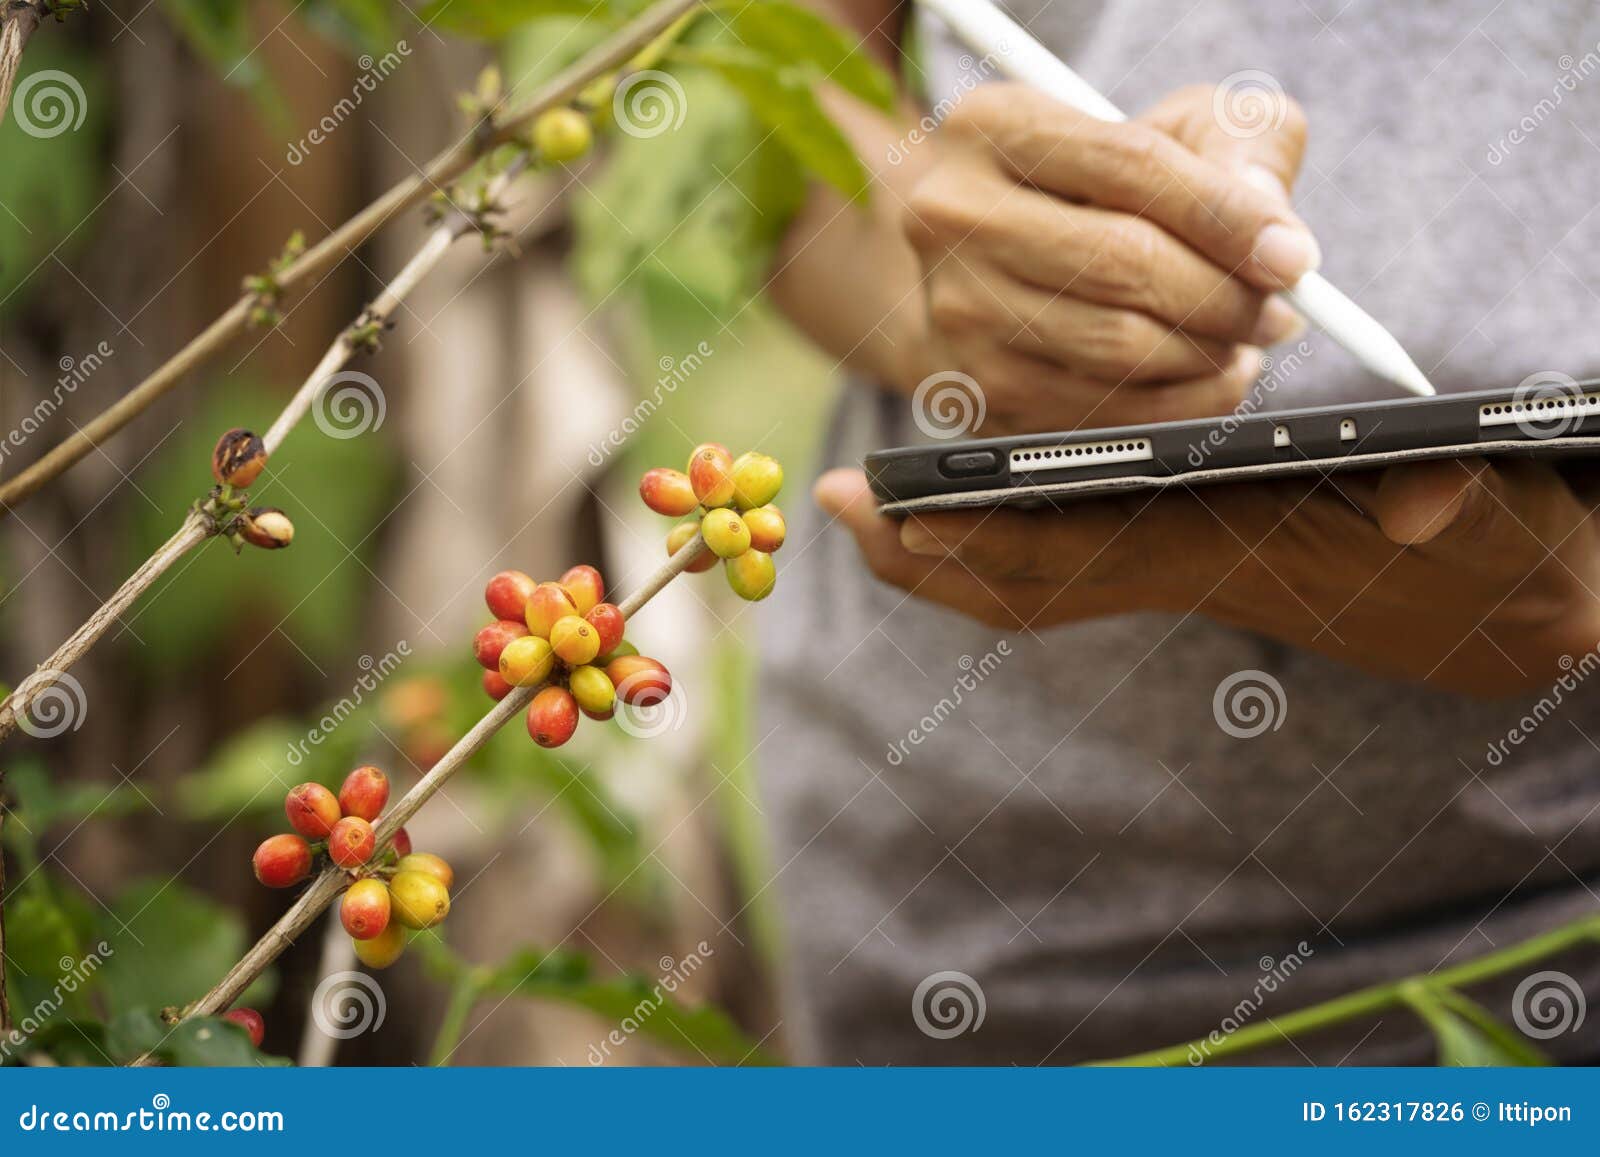 gardener inspector quality control arabica coffee by using tablet